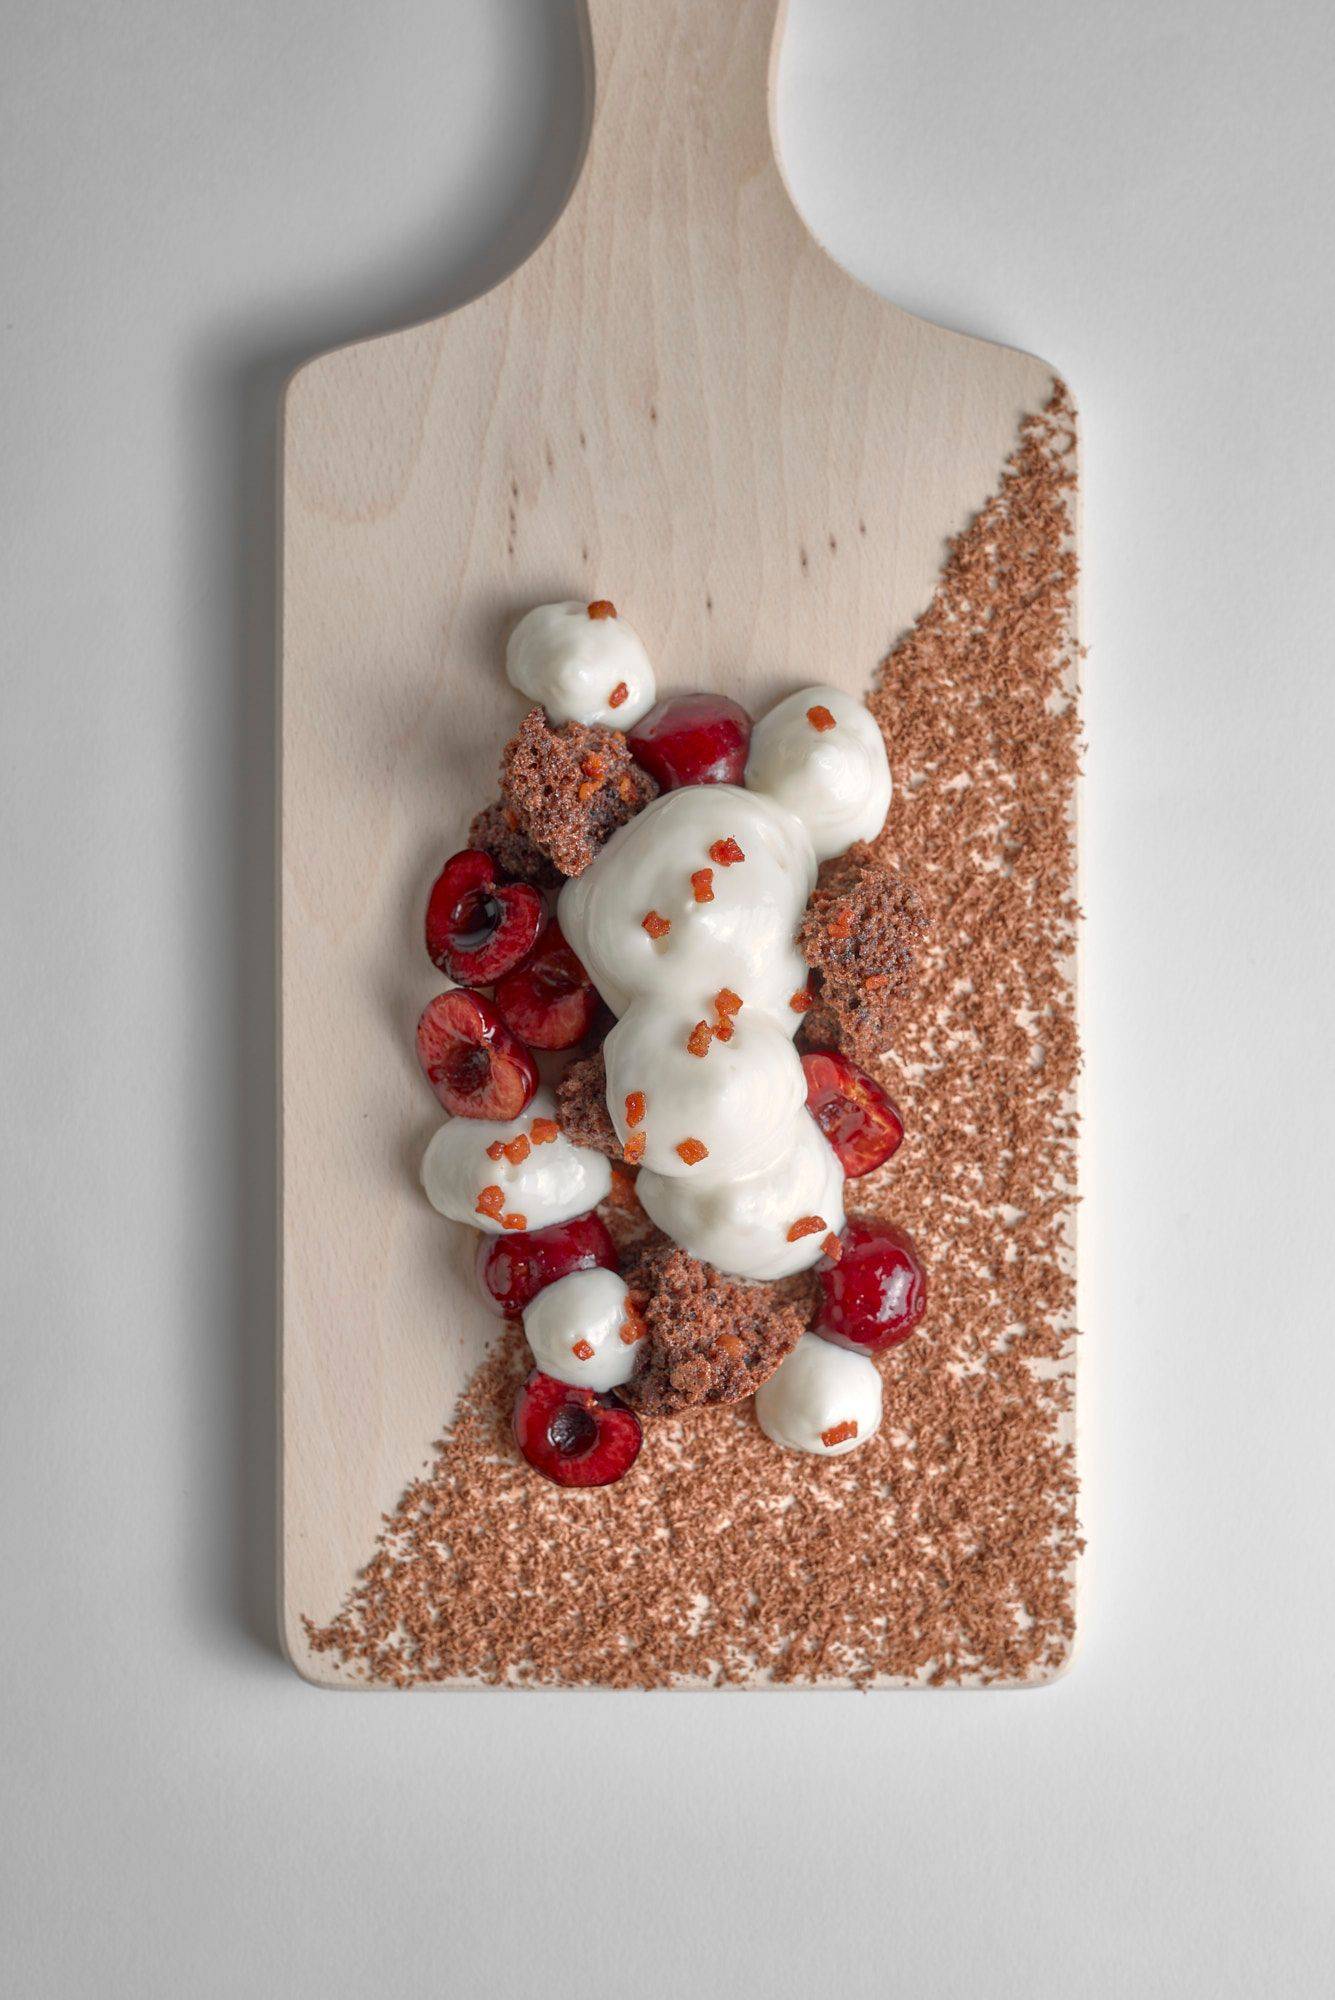 ayran black forest cake dessert with bacon on a wooden board with white background